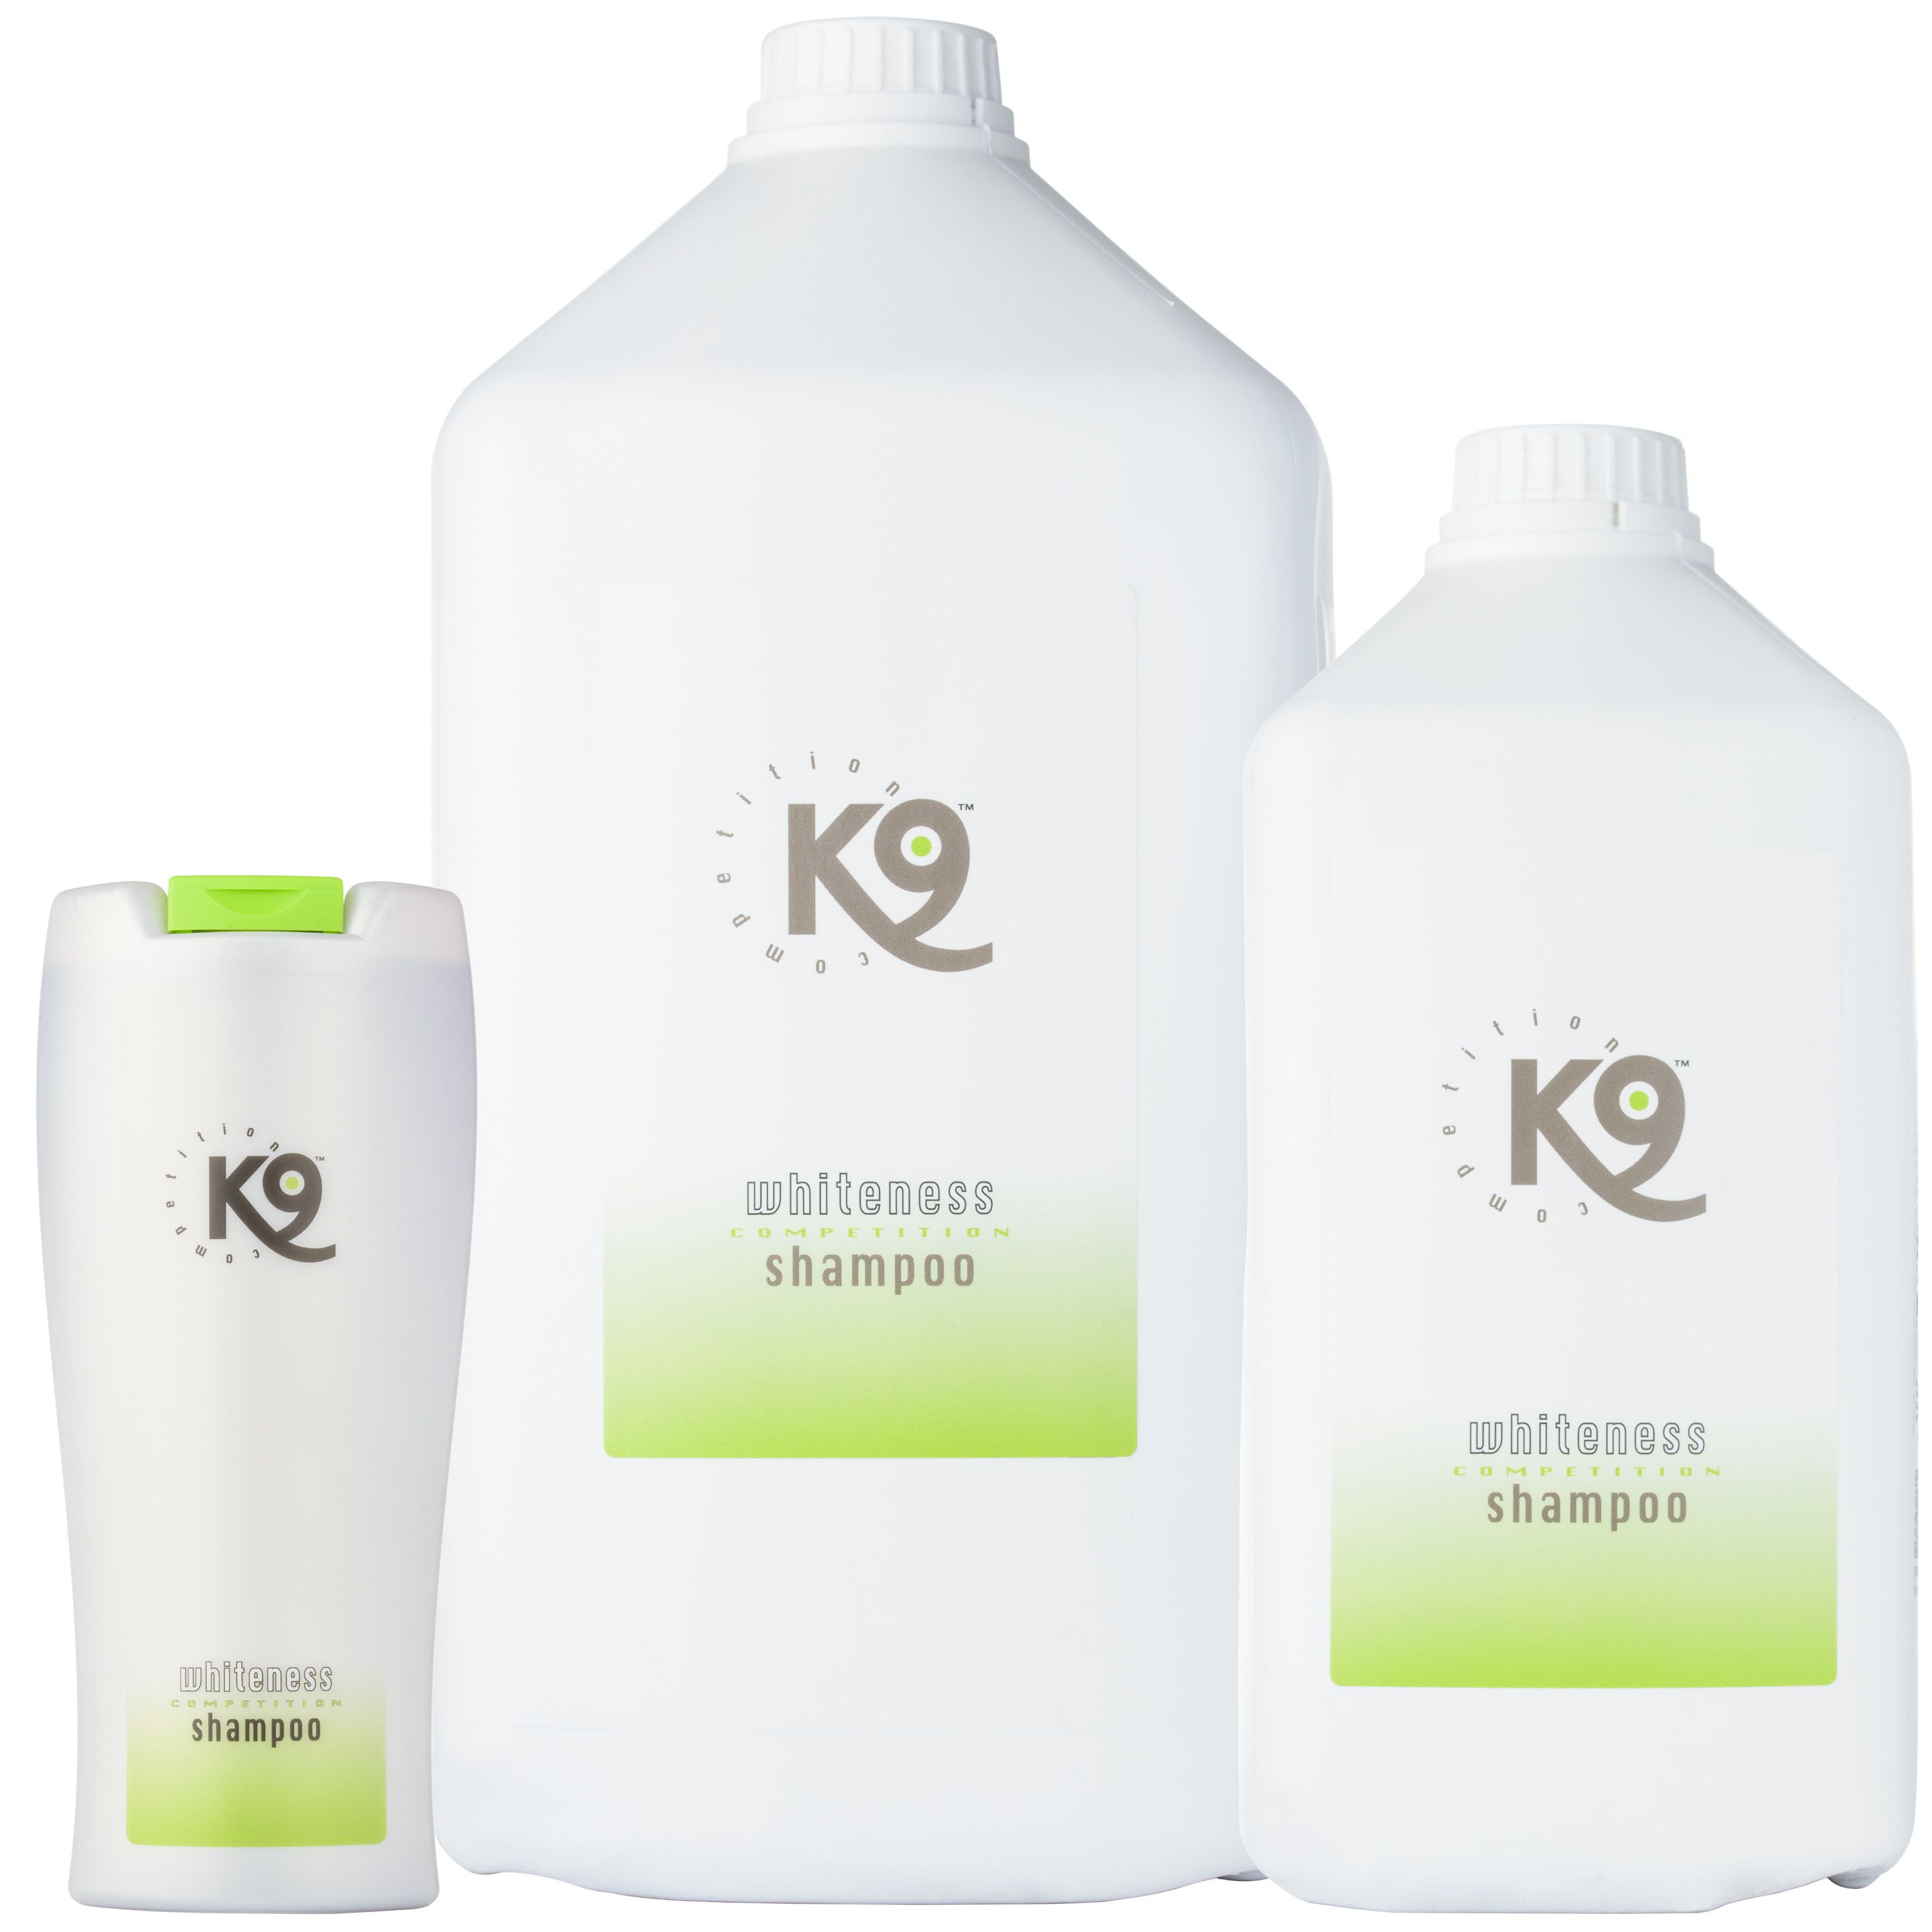 K9 Whiteness Shampoo - with Aloe Vera, for White and Coats, Concentrate 1:10